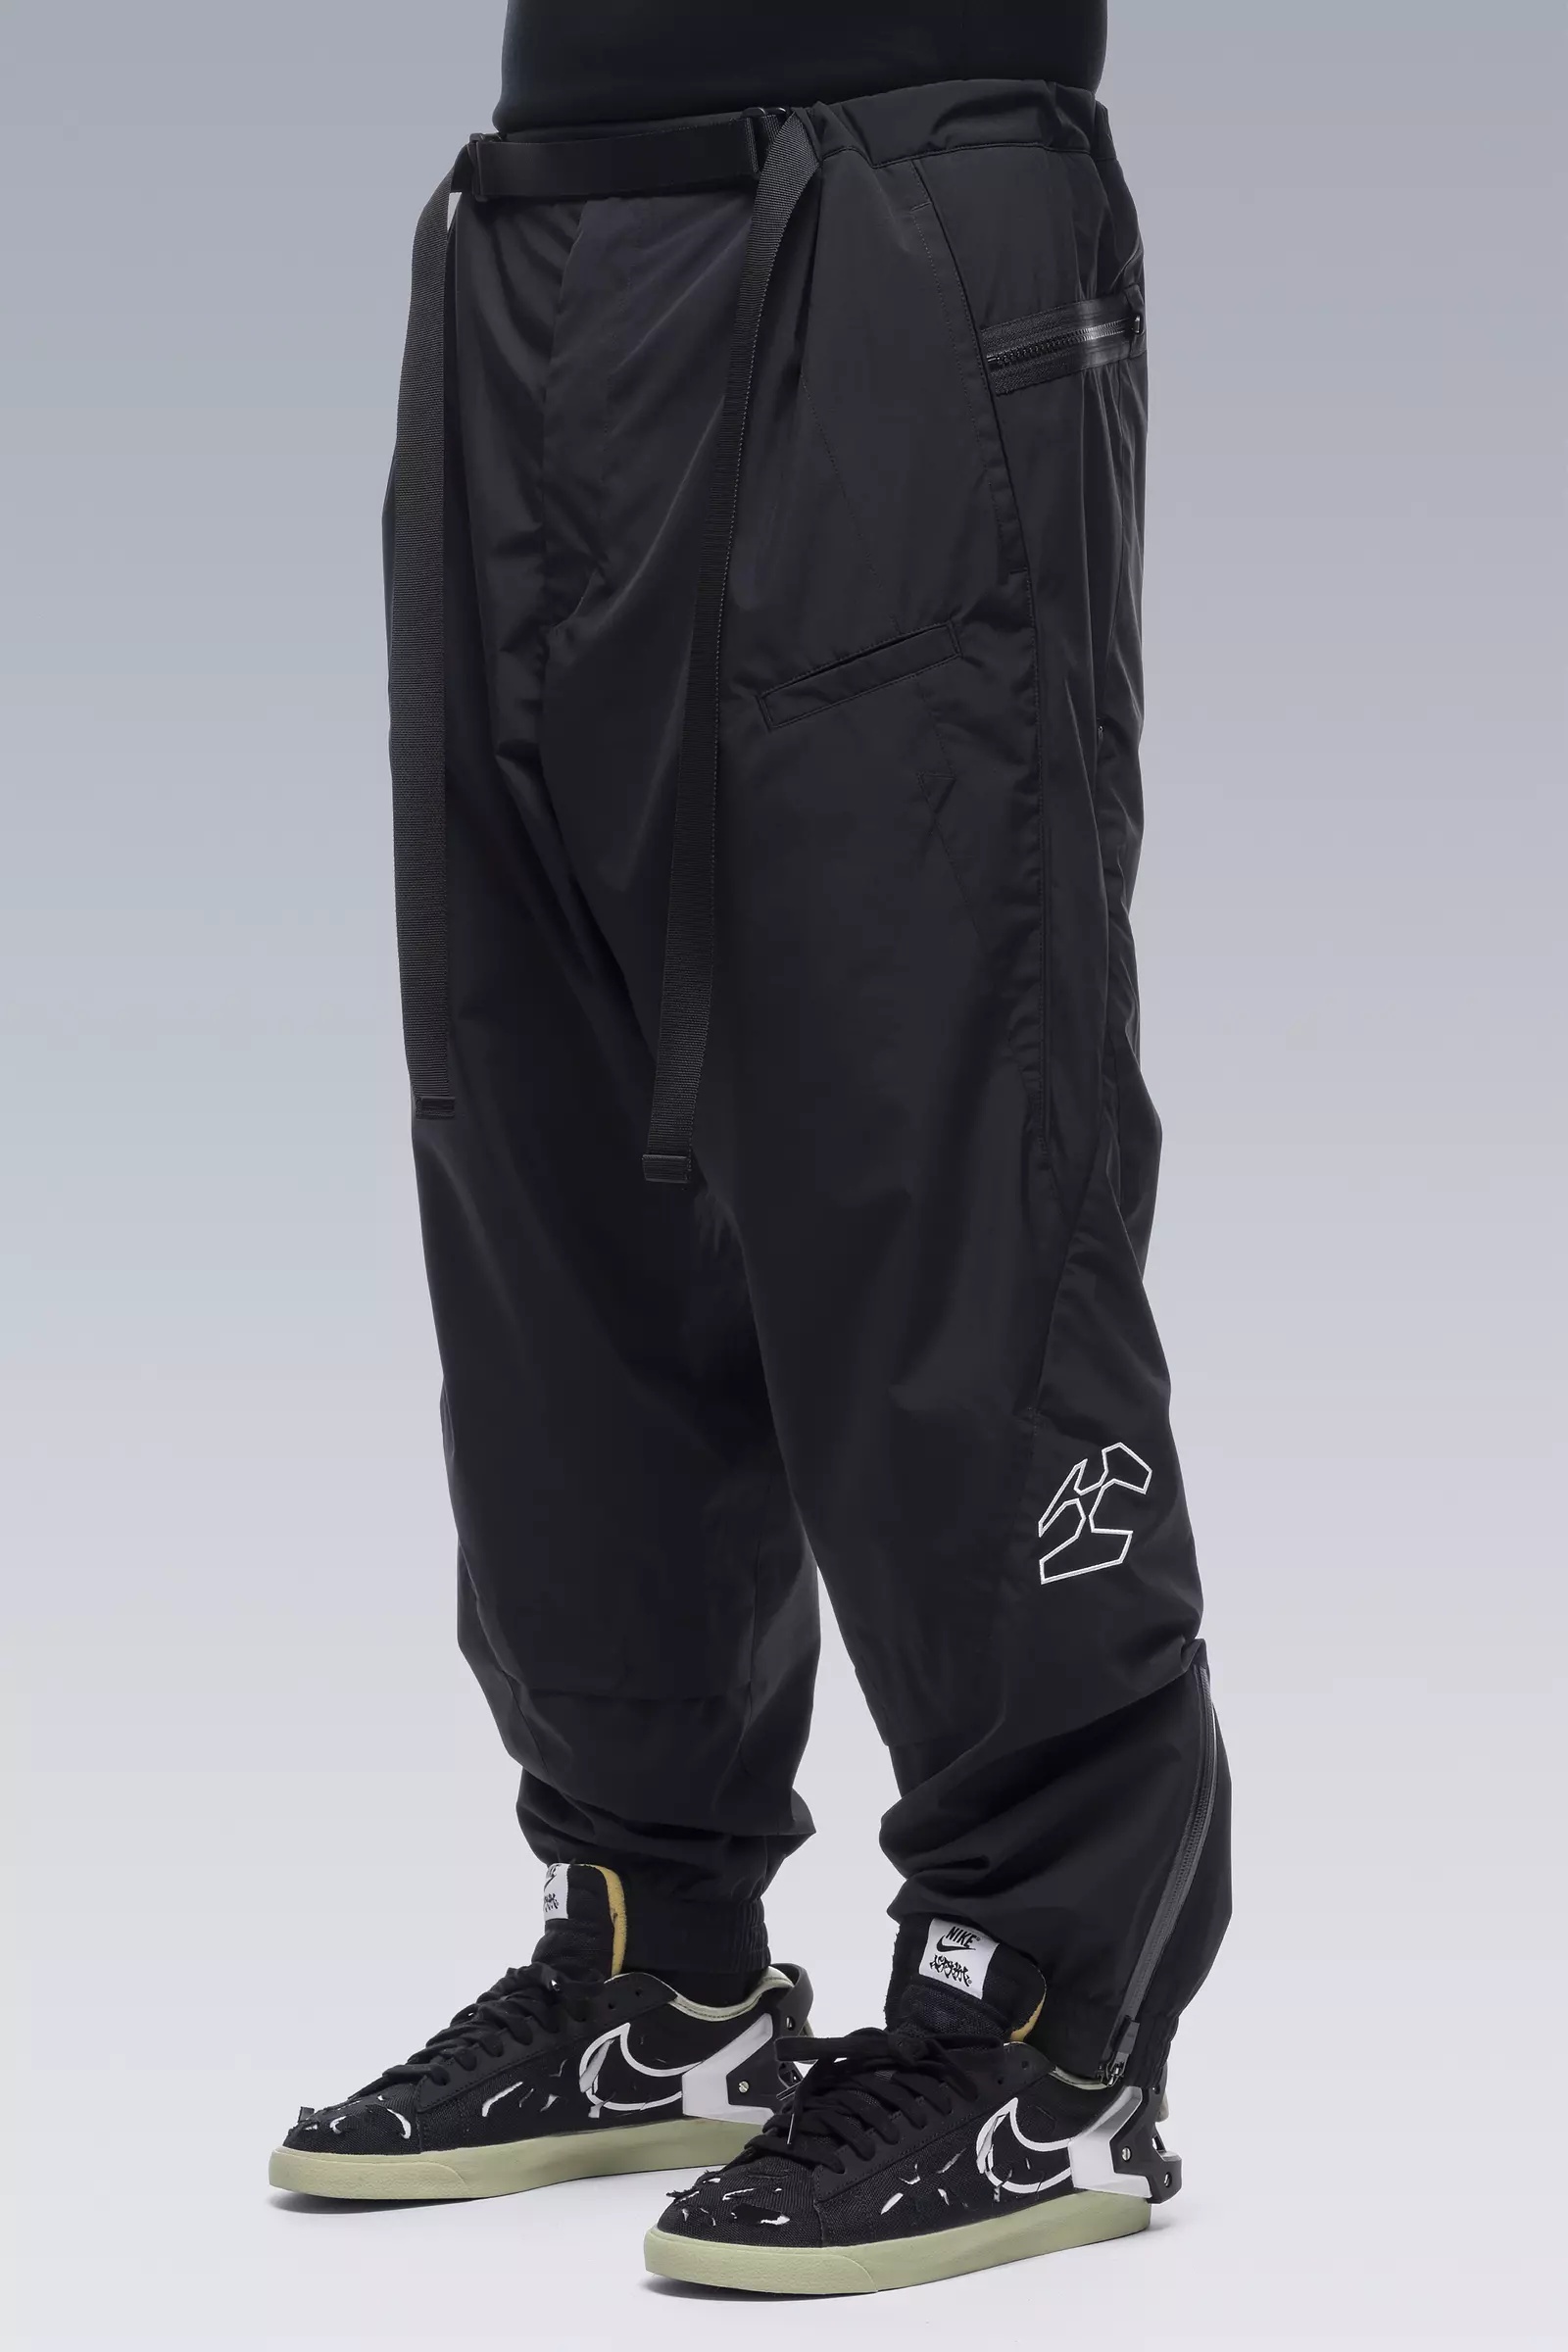 P53-WS 2L Gore-Tex® Windstopper® Insulated Vent Pants Black - 14